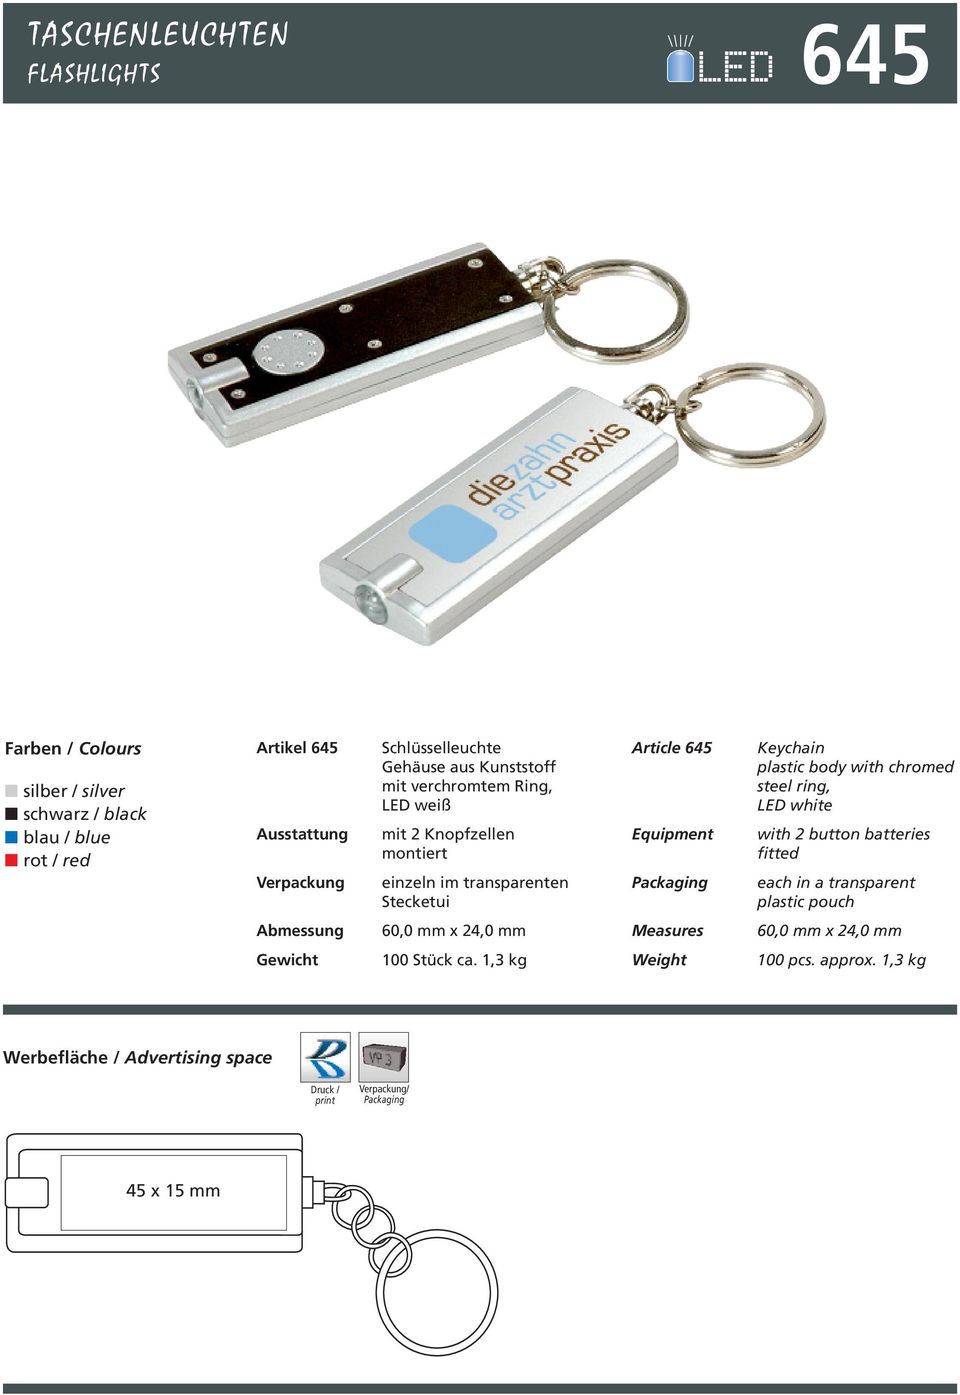 645 Keychain plastic body with chromed steel ring, with 2 button batteries fitted each in a transparent